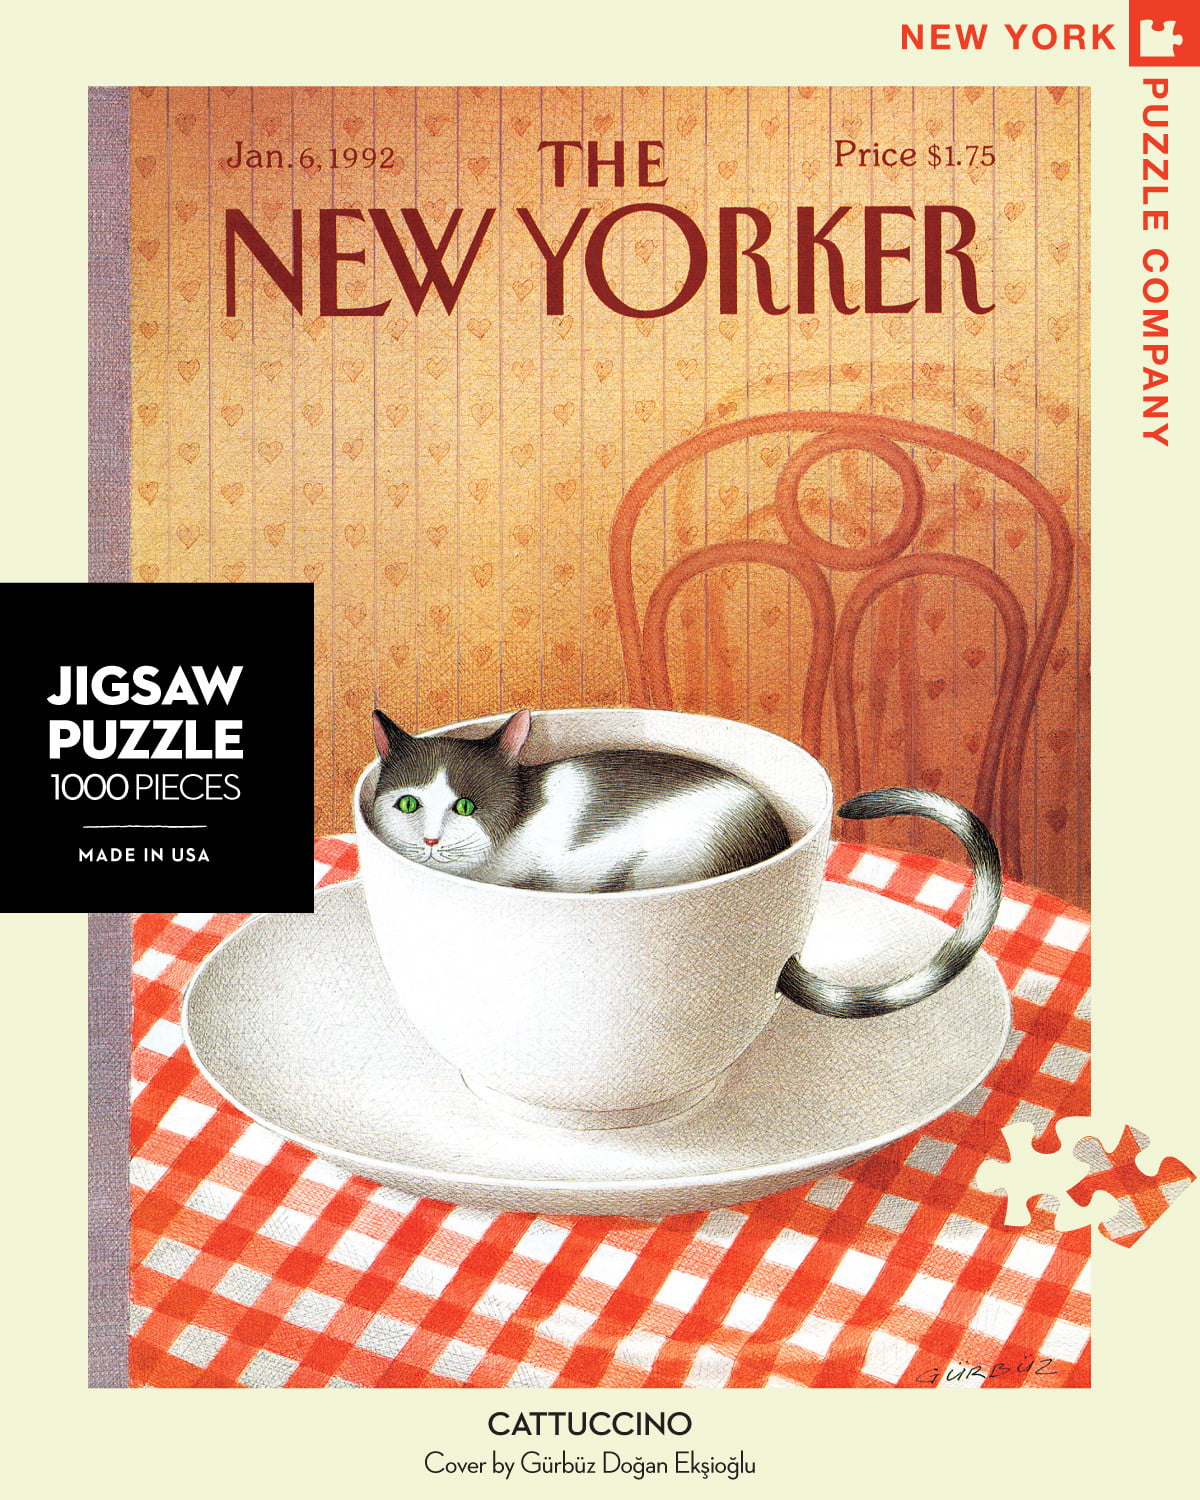 new-york-puzzle-company-cattaccino-1000-pc-jigsaw-puzzle